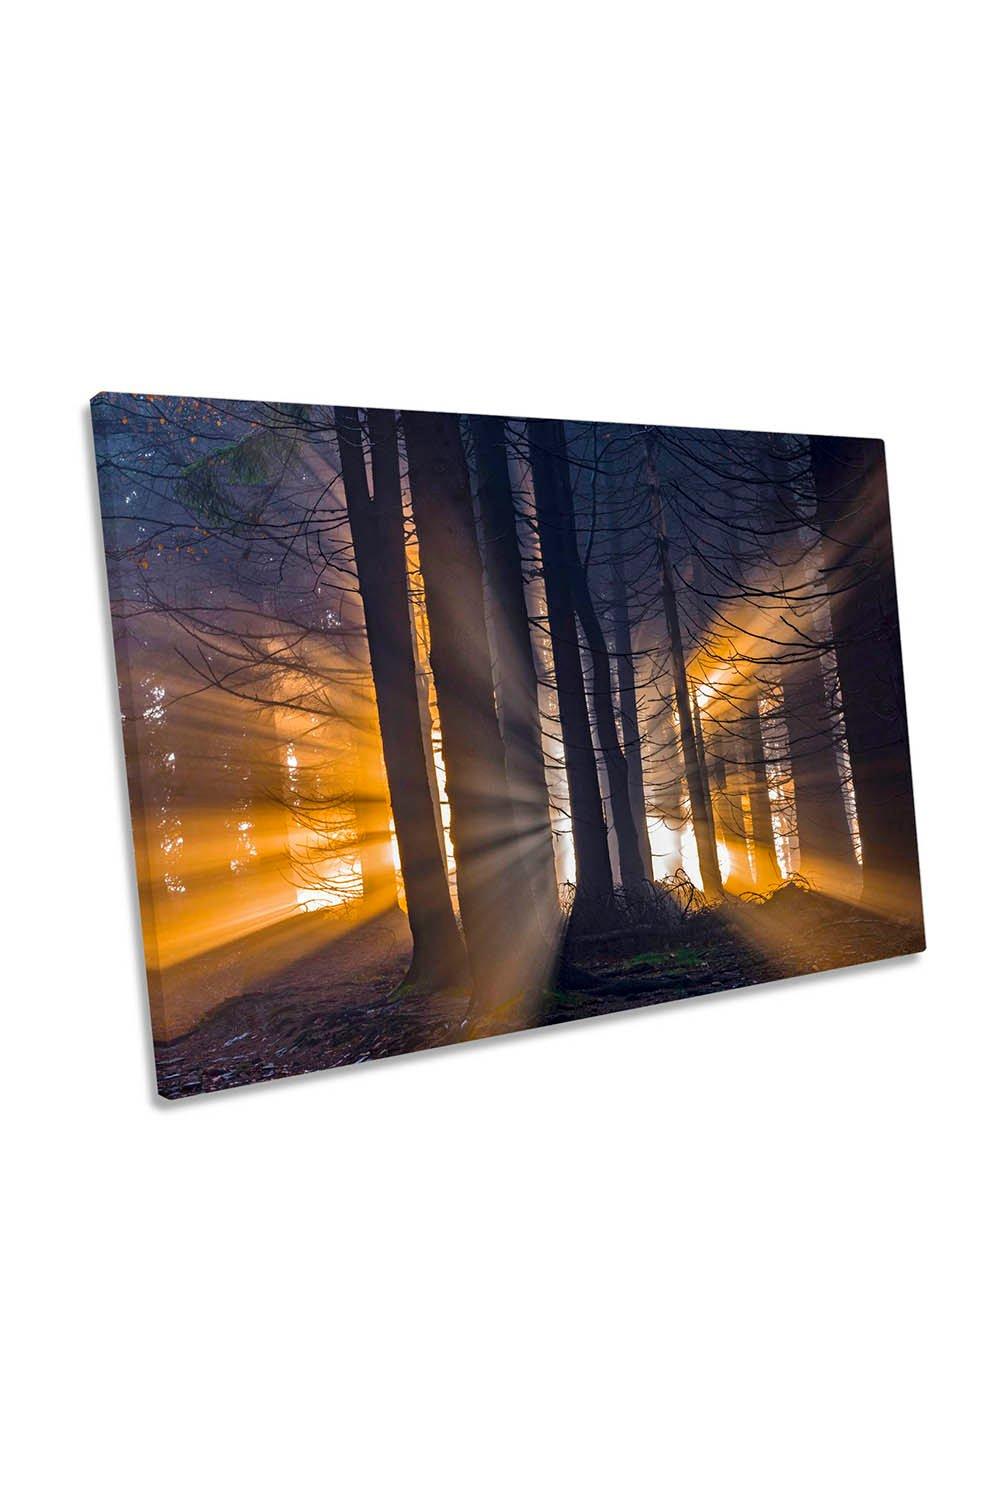 Forest Sunset Rays Orange Landscape Canvas Wall Art Picture Print